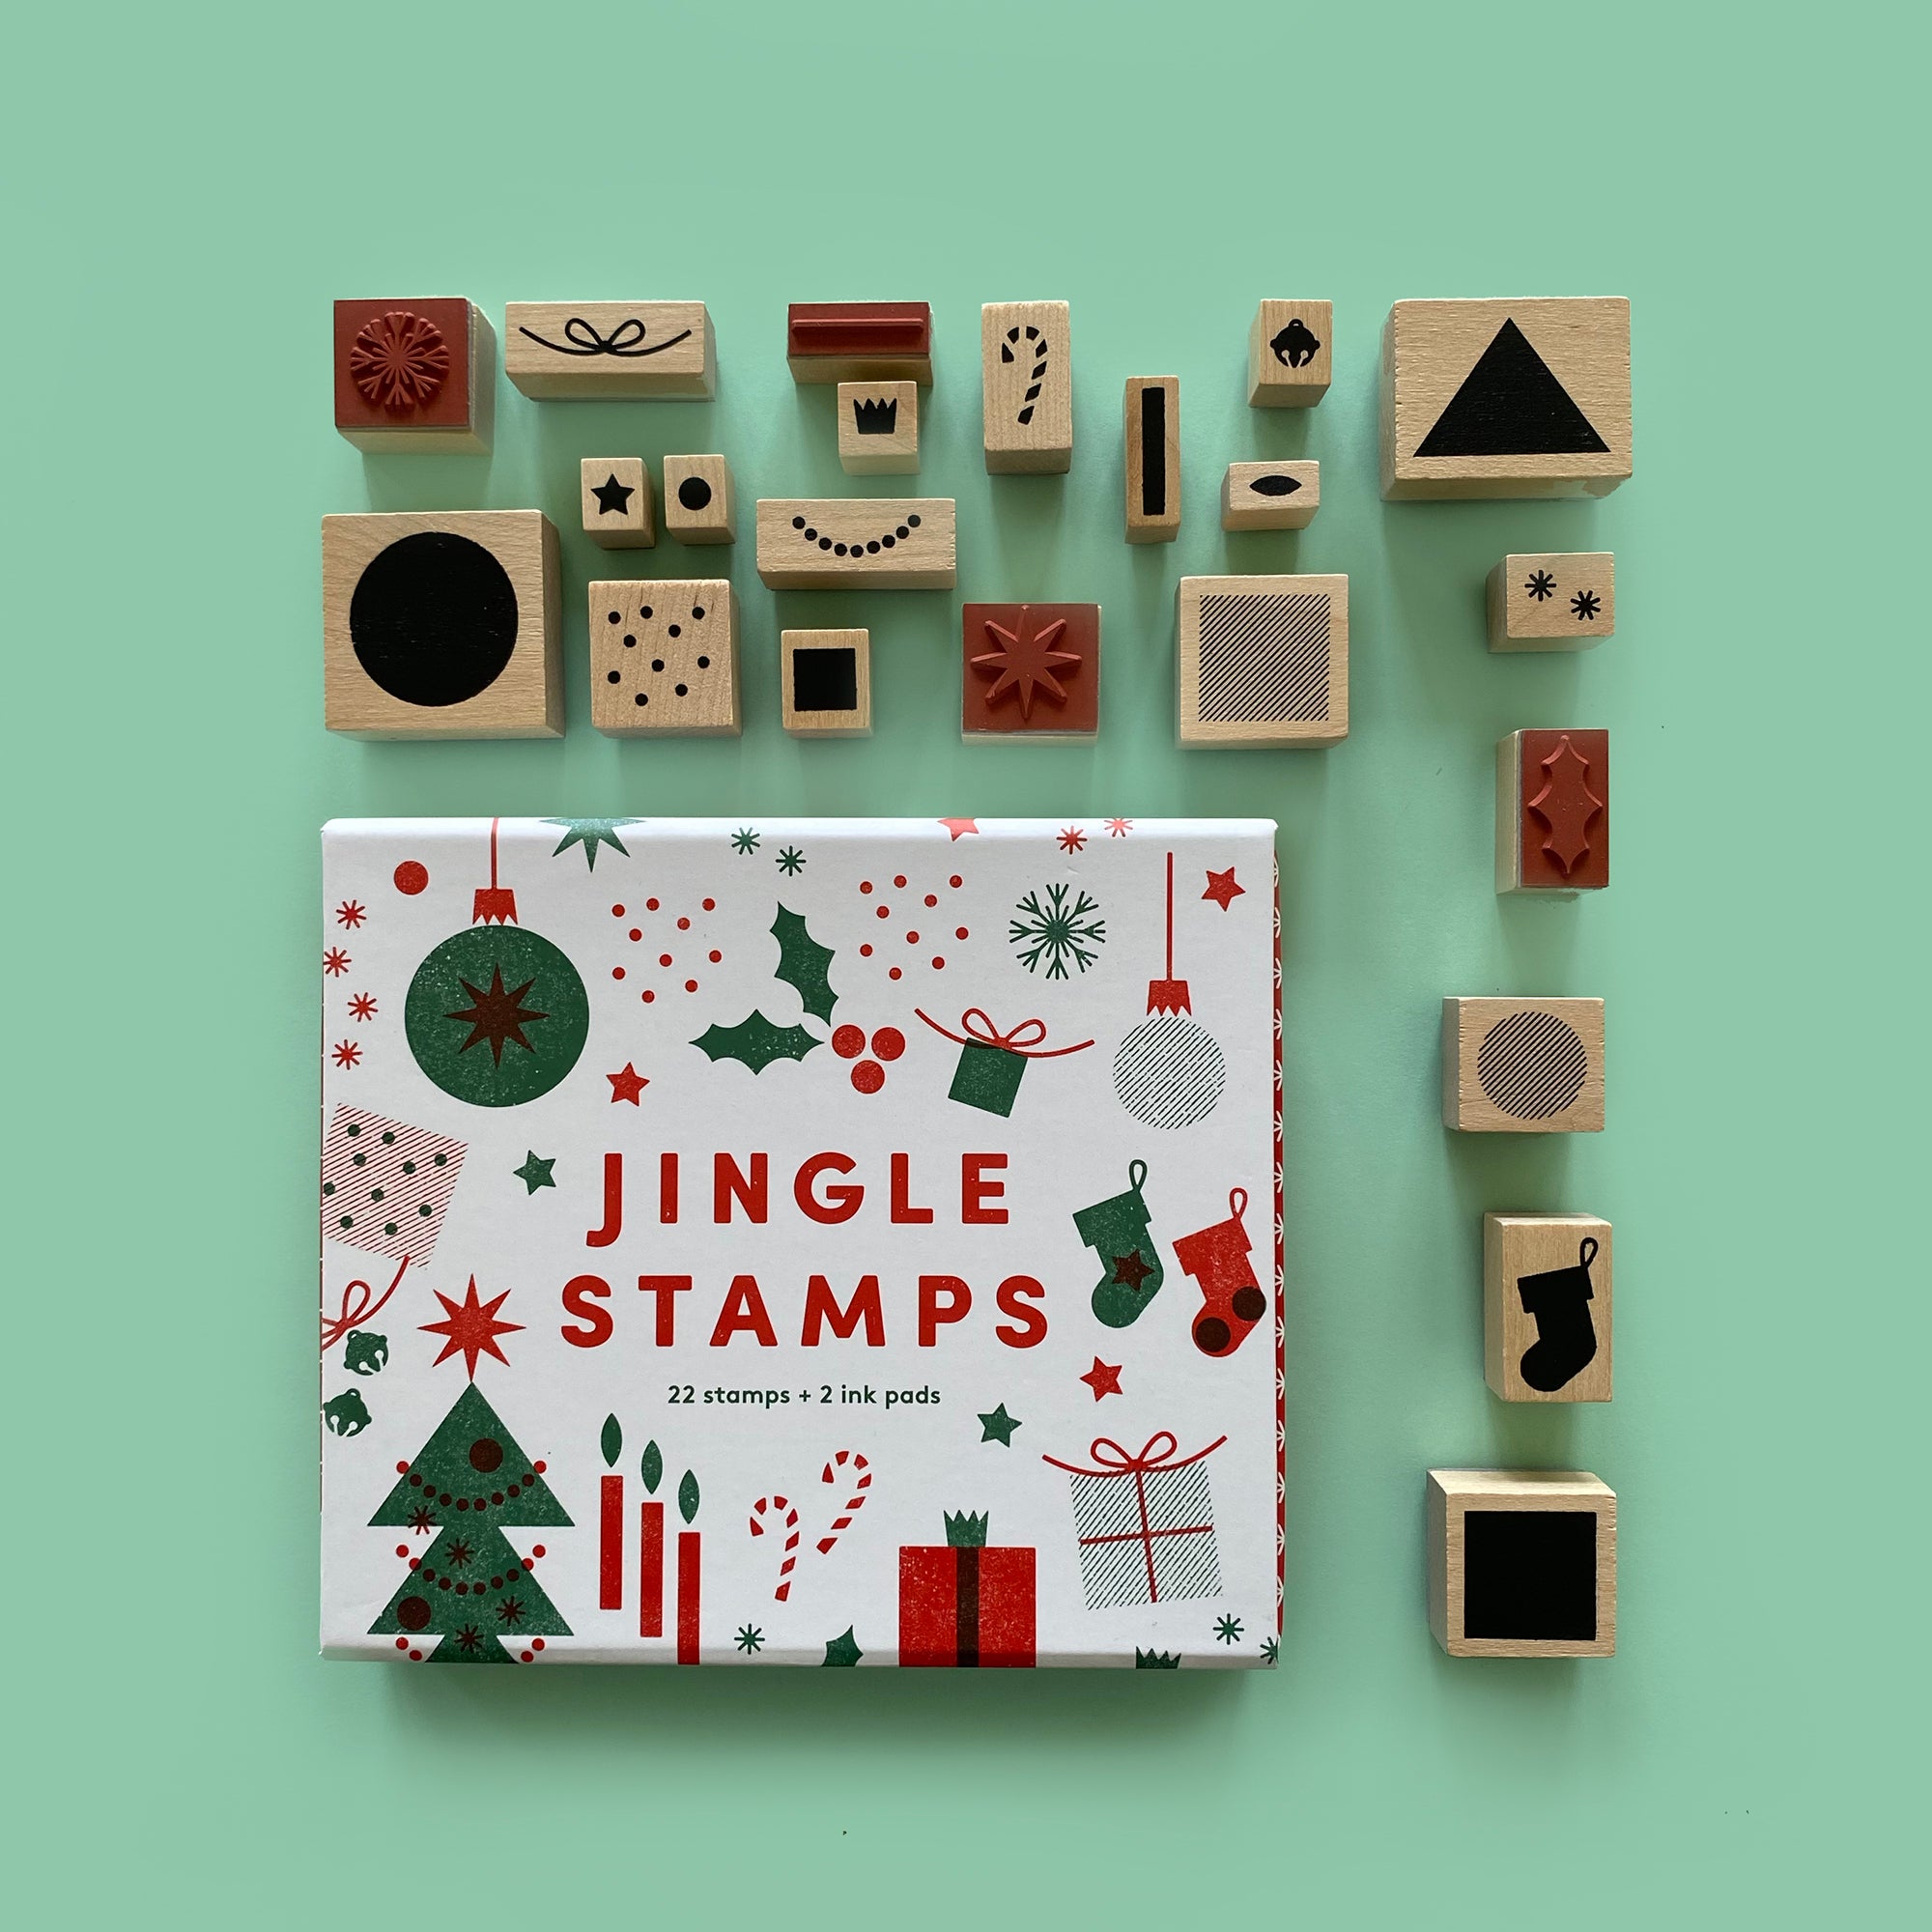 JINGLE STAMPS - 40% OFF